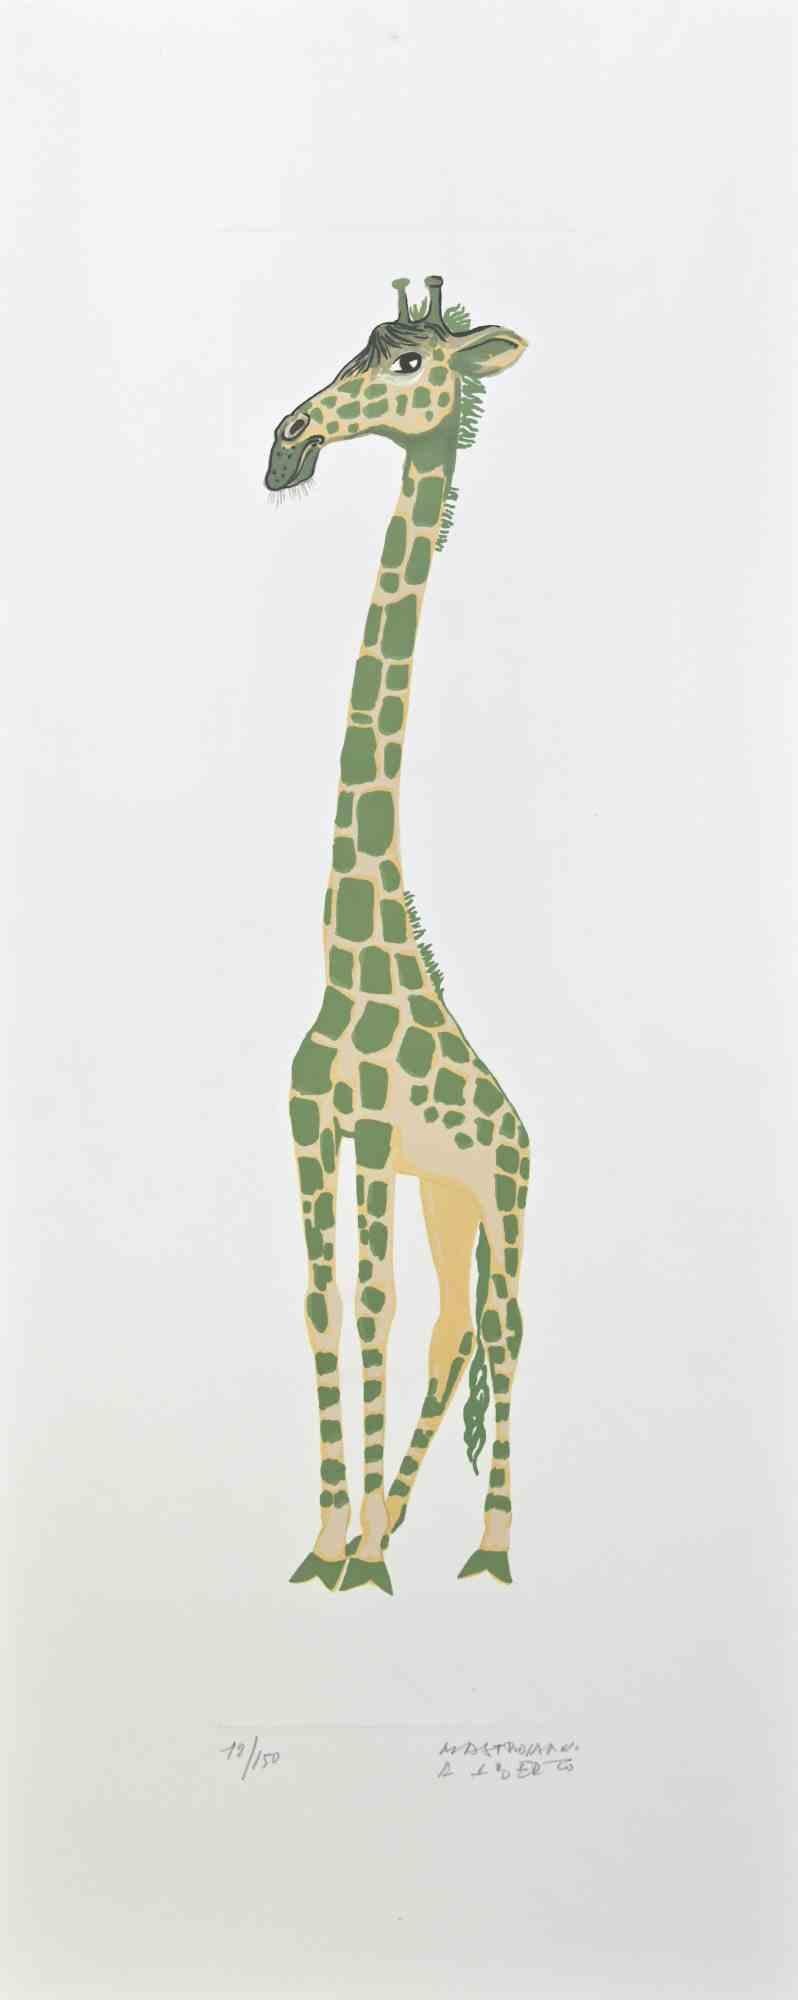 Girafe is a lithograph realized by Alberto Mastroianni in the 1970s.

Hand Signed on the lower right margin. Numbered on the lower margin in pencil. 

The artwork represents an interesting green giraffe, a combination of fantasy and realism.

The